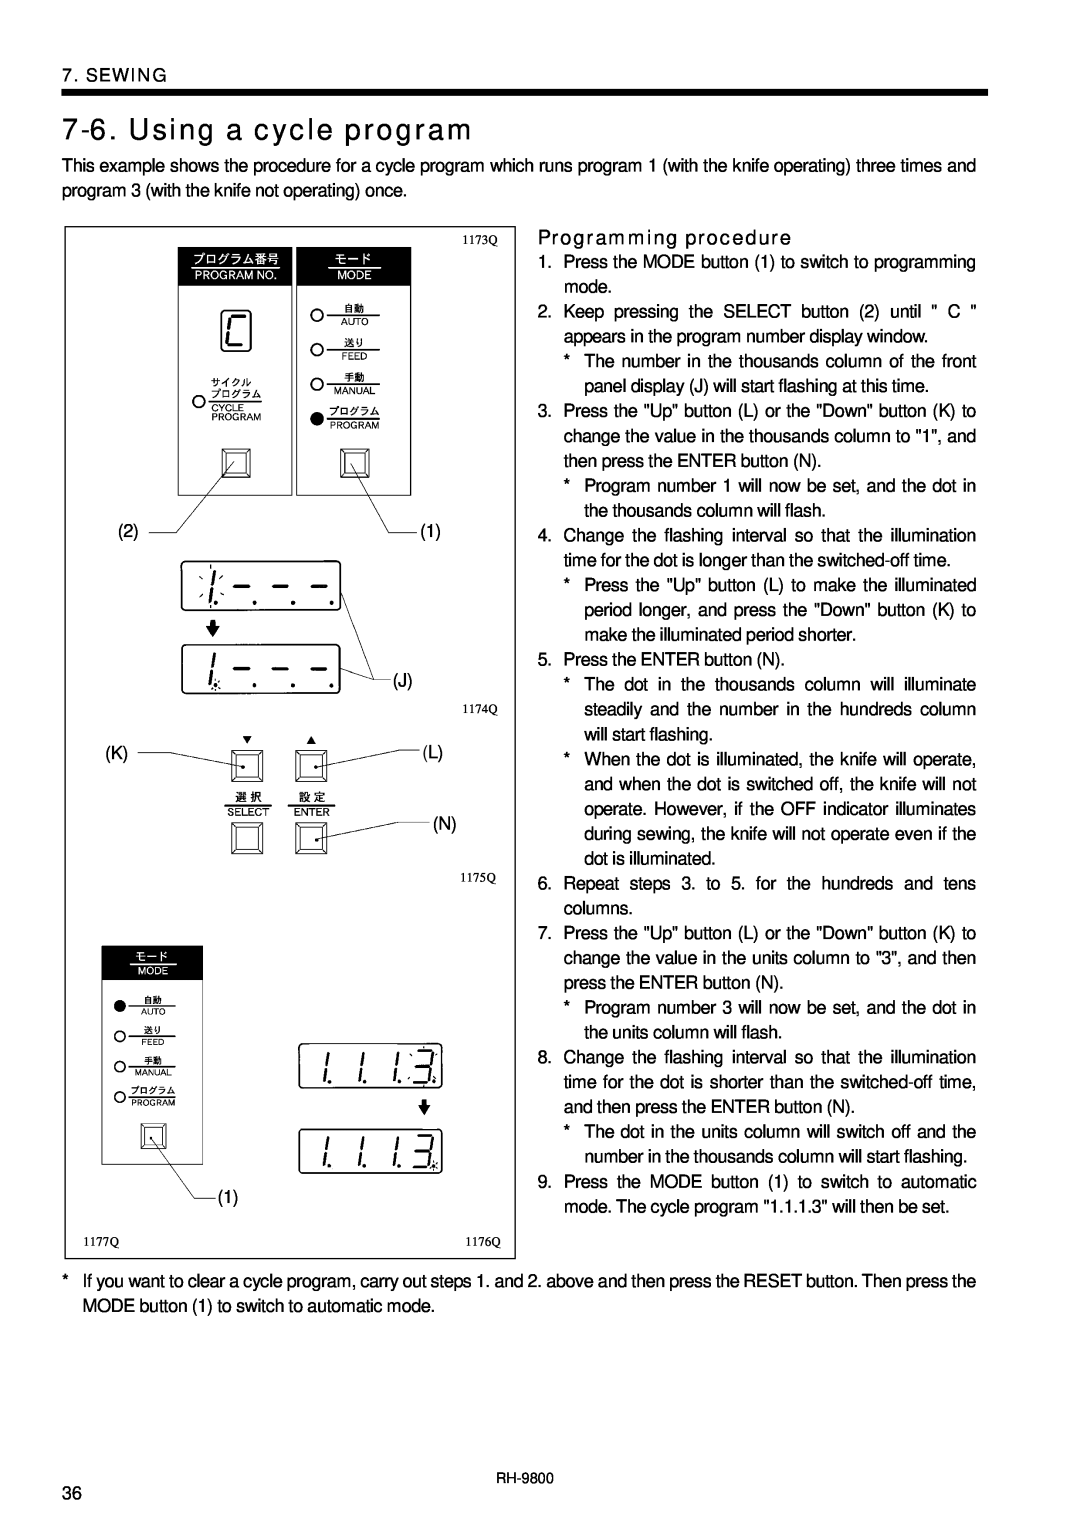 Brother DH4-B980 instruction manual Using a cycle program, Programming procedure, Sewing 